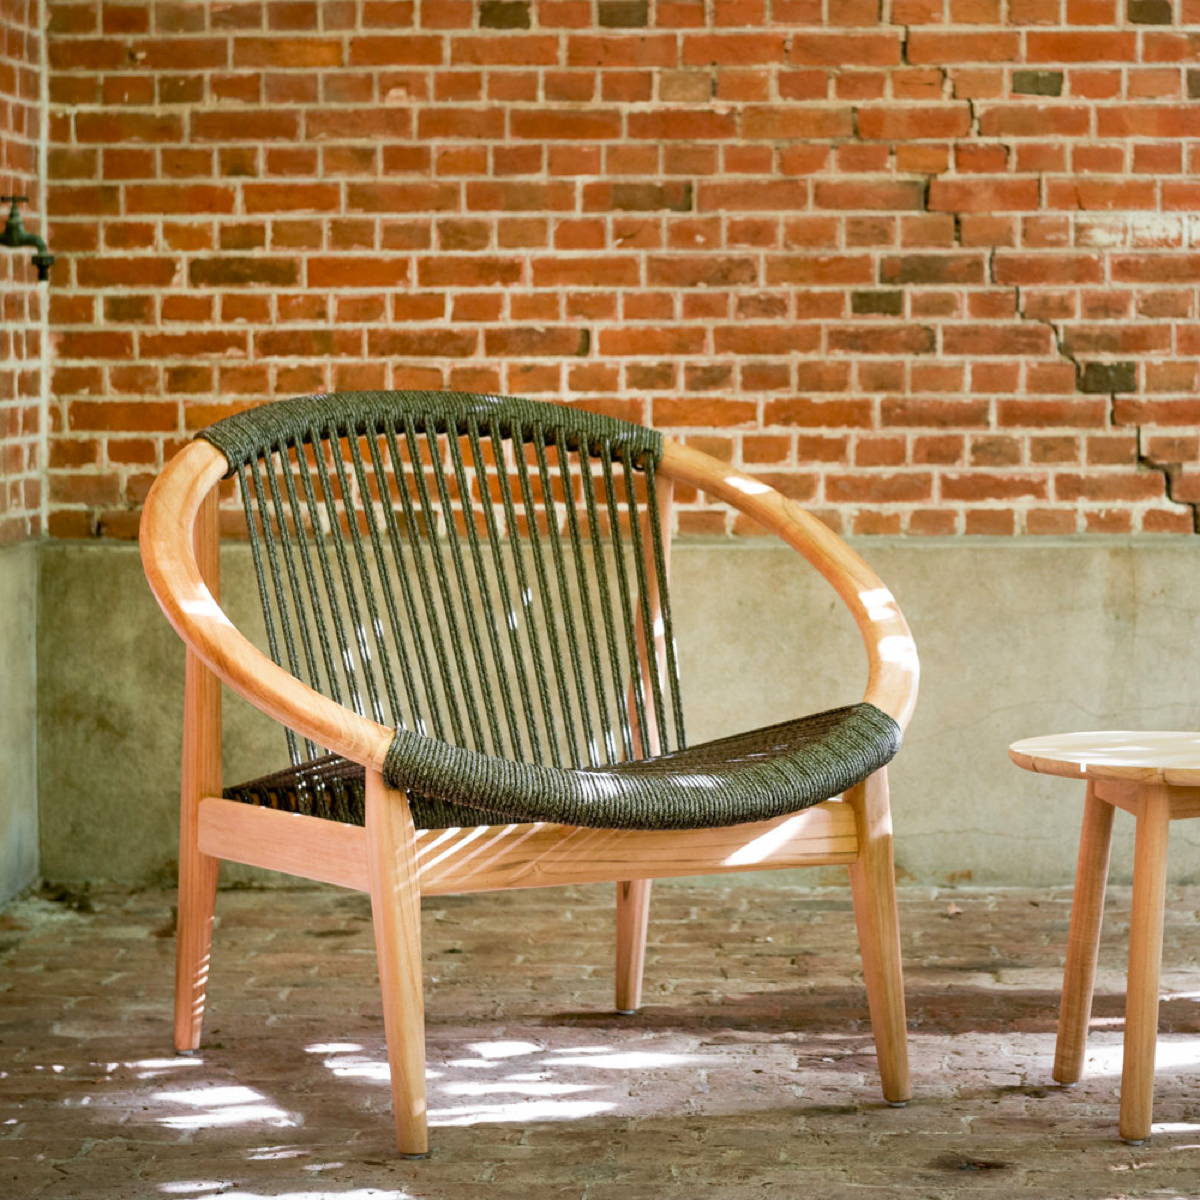 A striking chair featuring round teak frame and forest green woven seat.